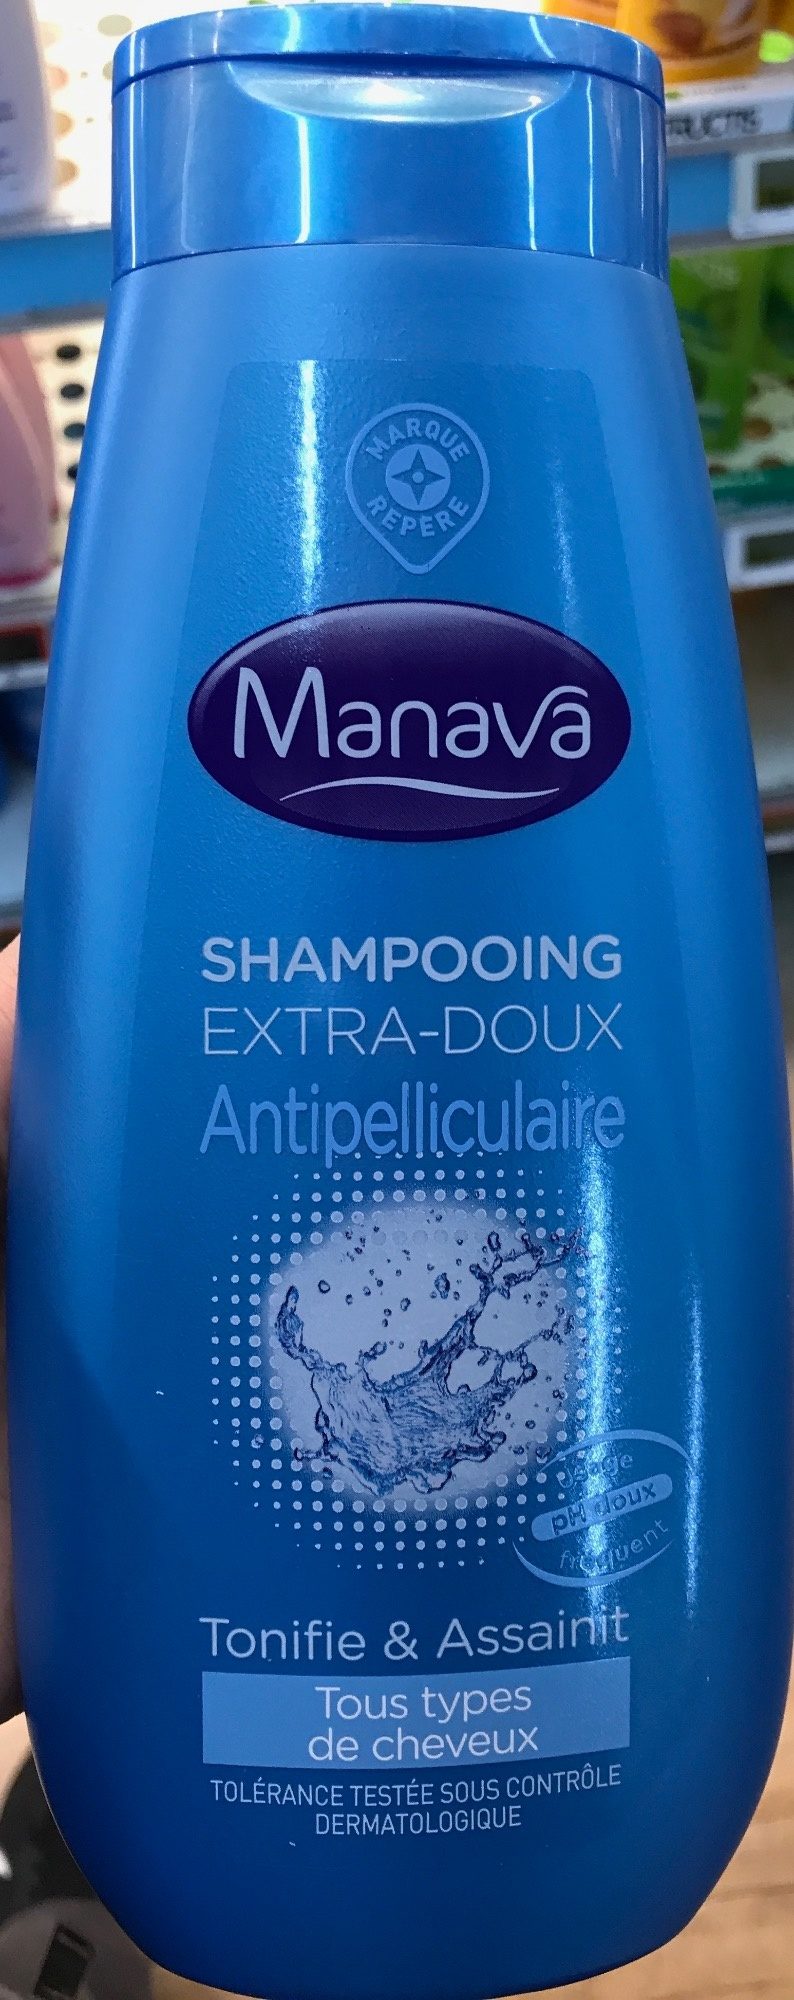 Shampooing extra-doux antipelliculaire - 製品 - fr